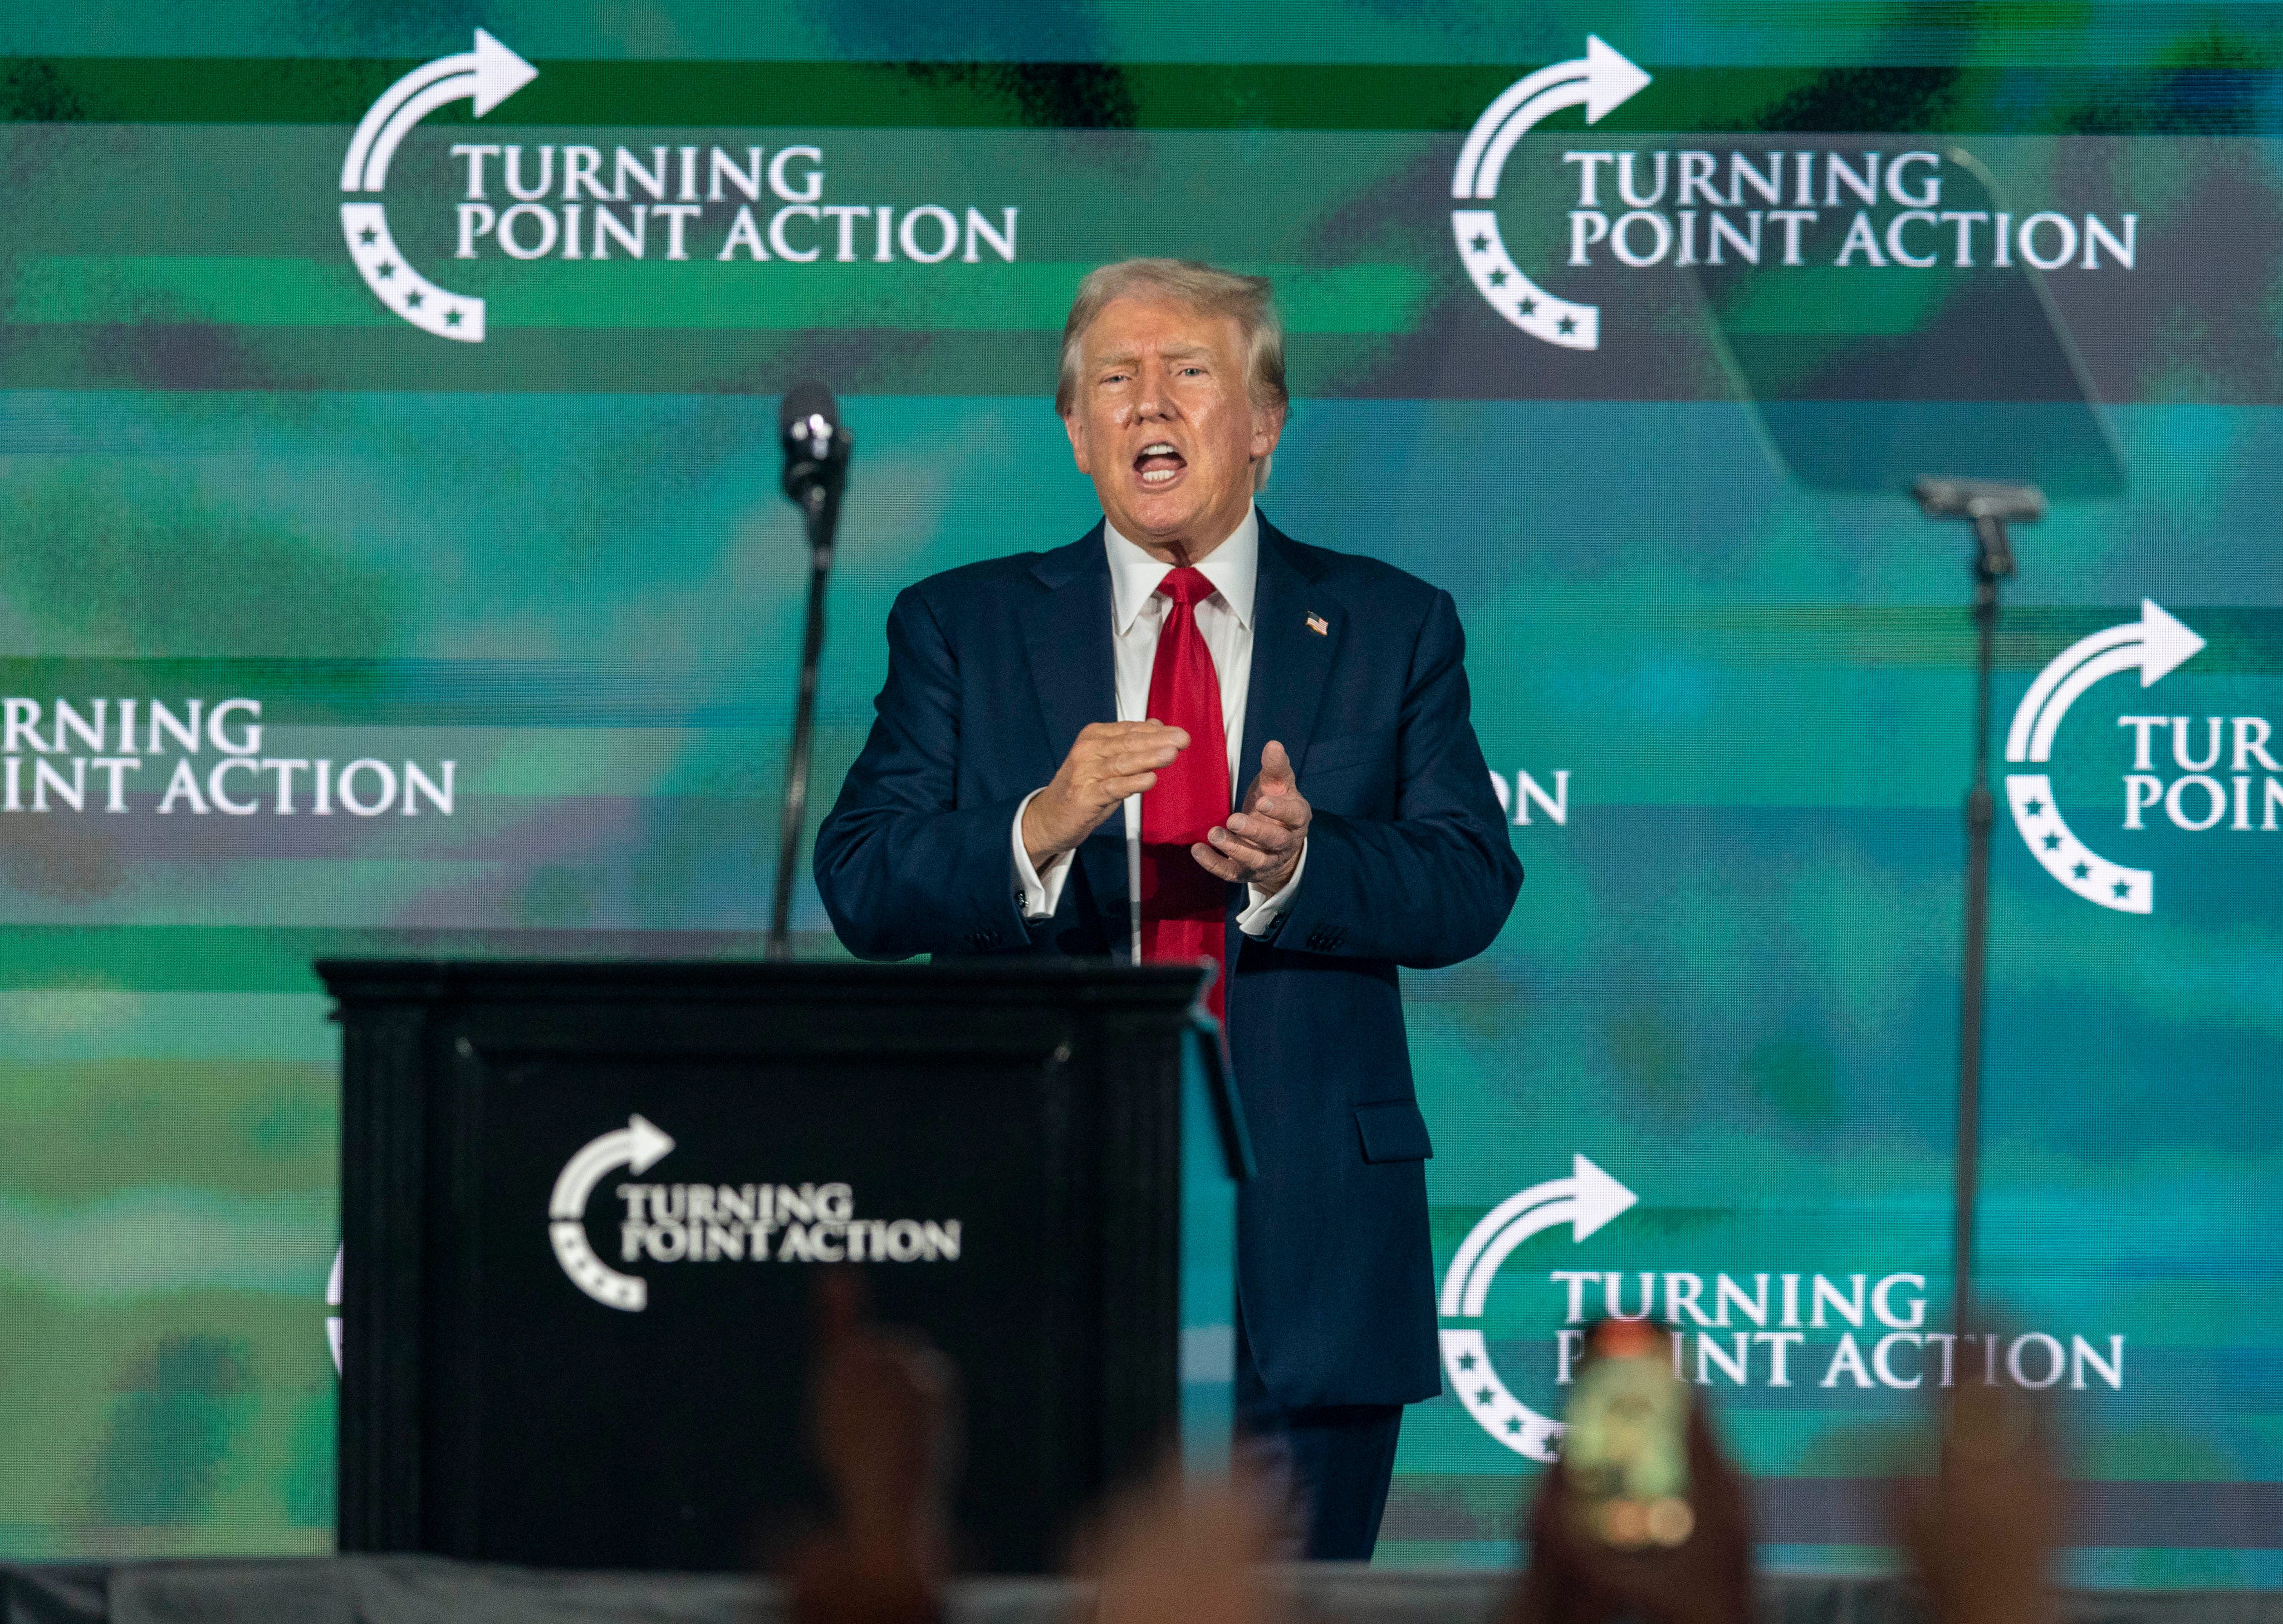 Donald Trump rallies supporters at the Turning Point Believers' Summit in West Palm Beach